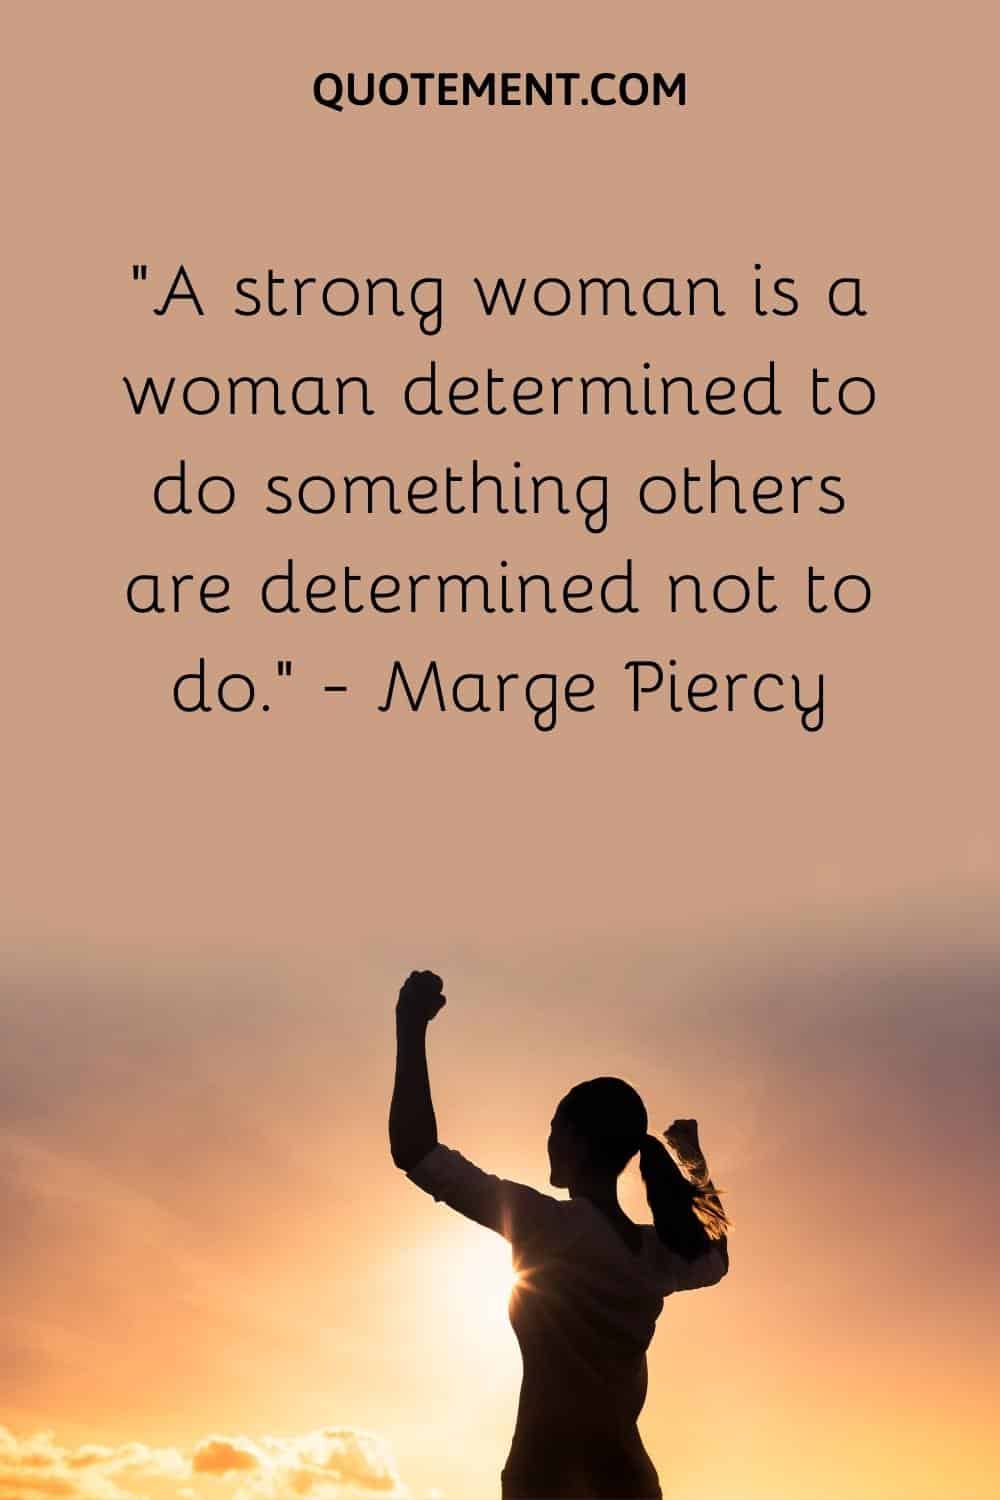 A strong woman is a woman determined to do something others are determined not to do